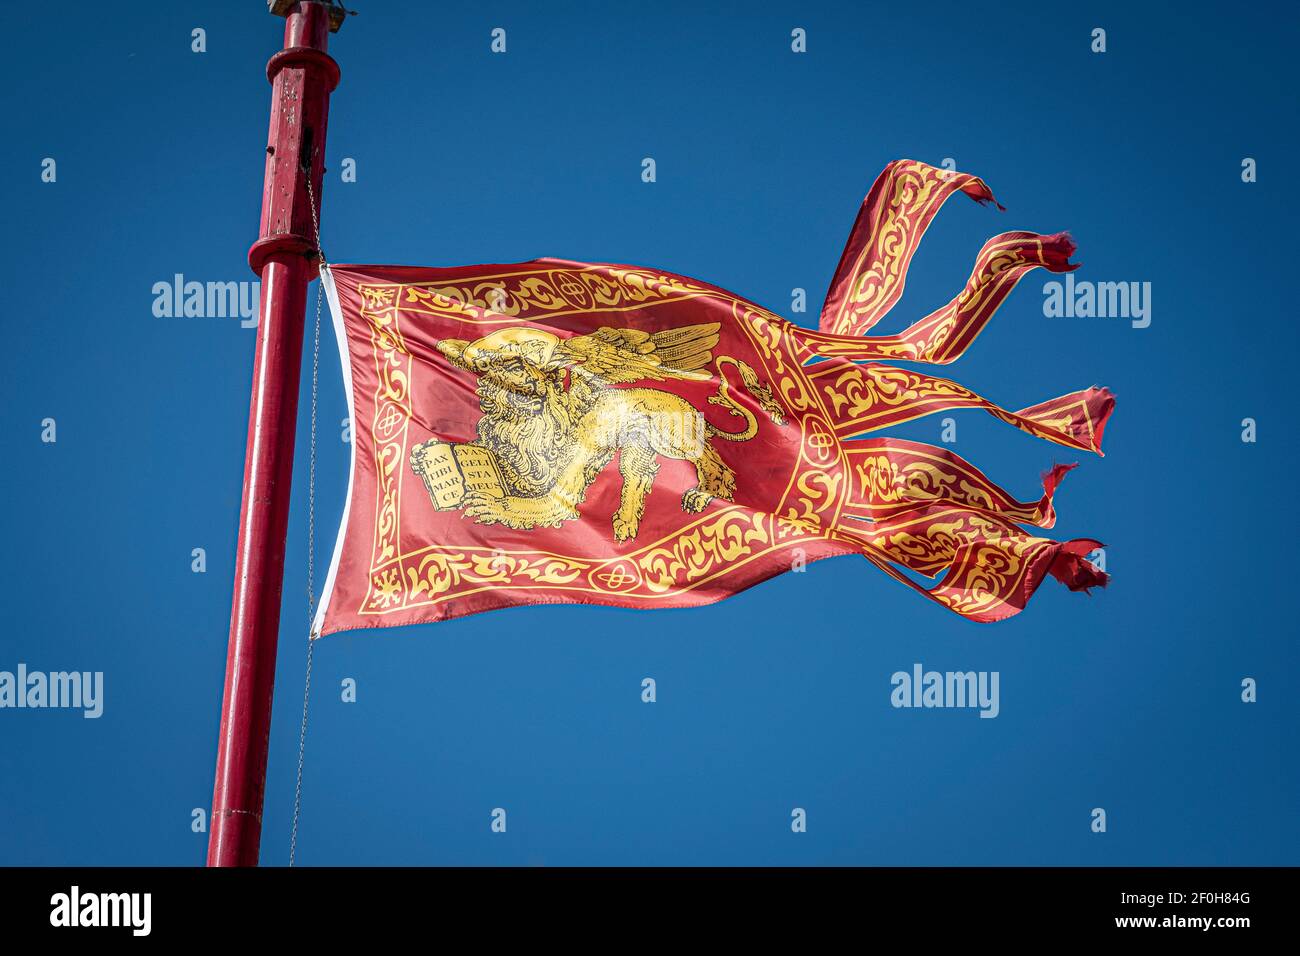 Venice, Italy. The flag or Standard of Saint Mark flying in Venice Stock Photo